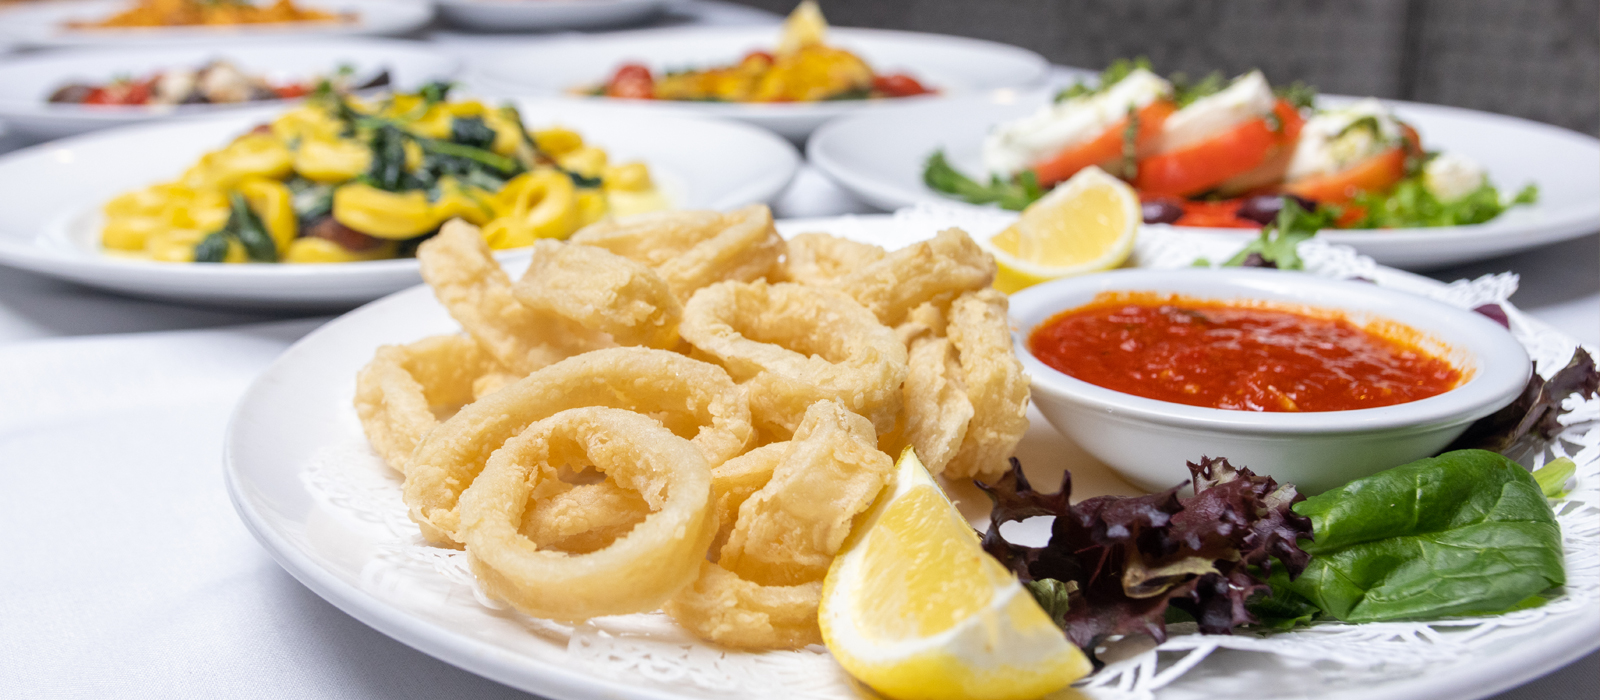 FRIED OR SPICY CALAMARI Choice of fried calamari served with marinara sauce OR fried calamari tossed with honey, red wine, and cherry hot peppers